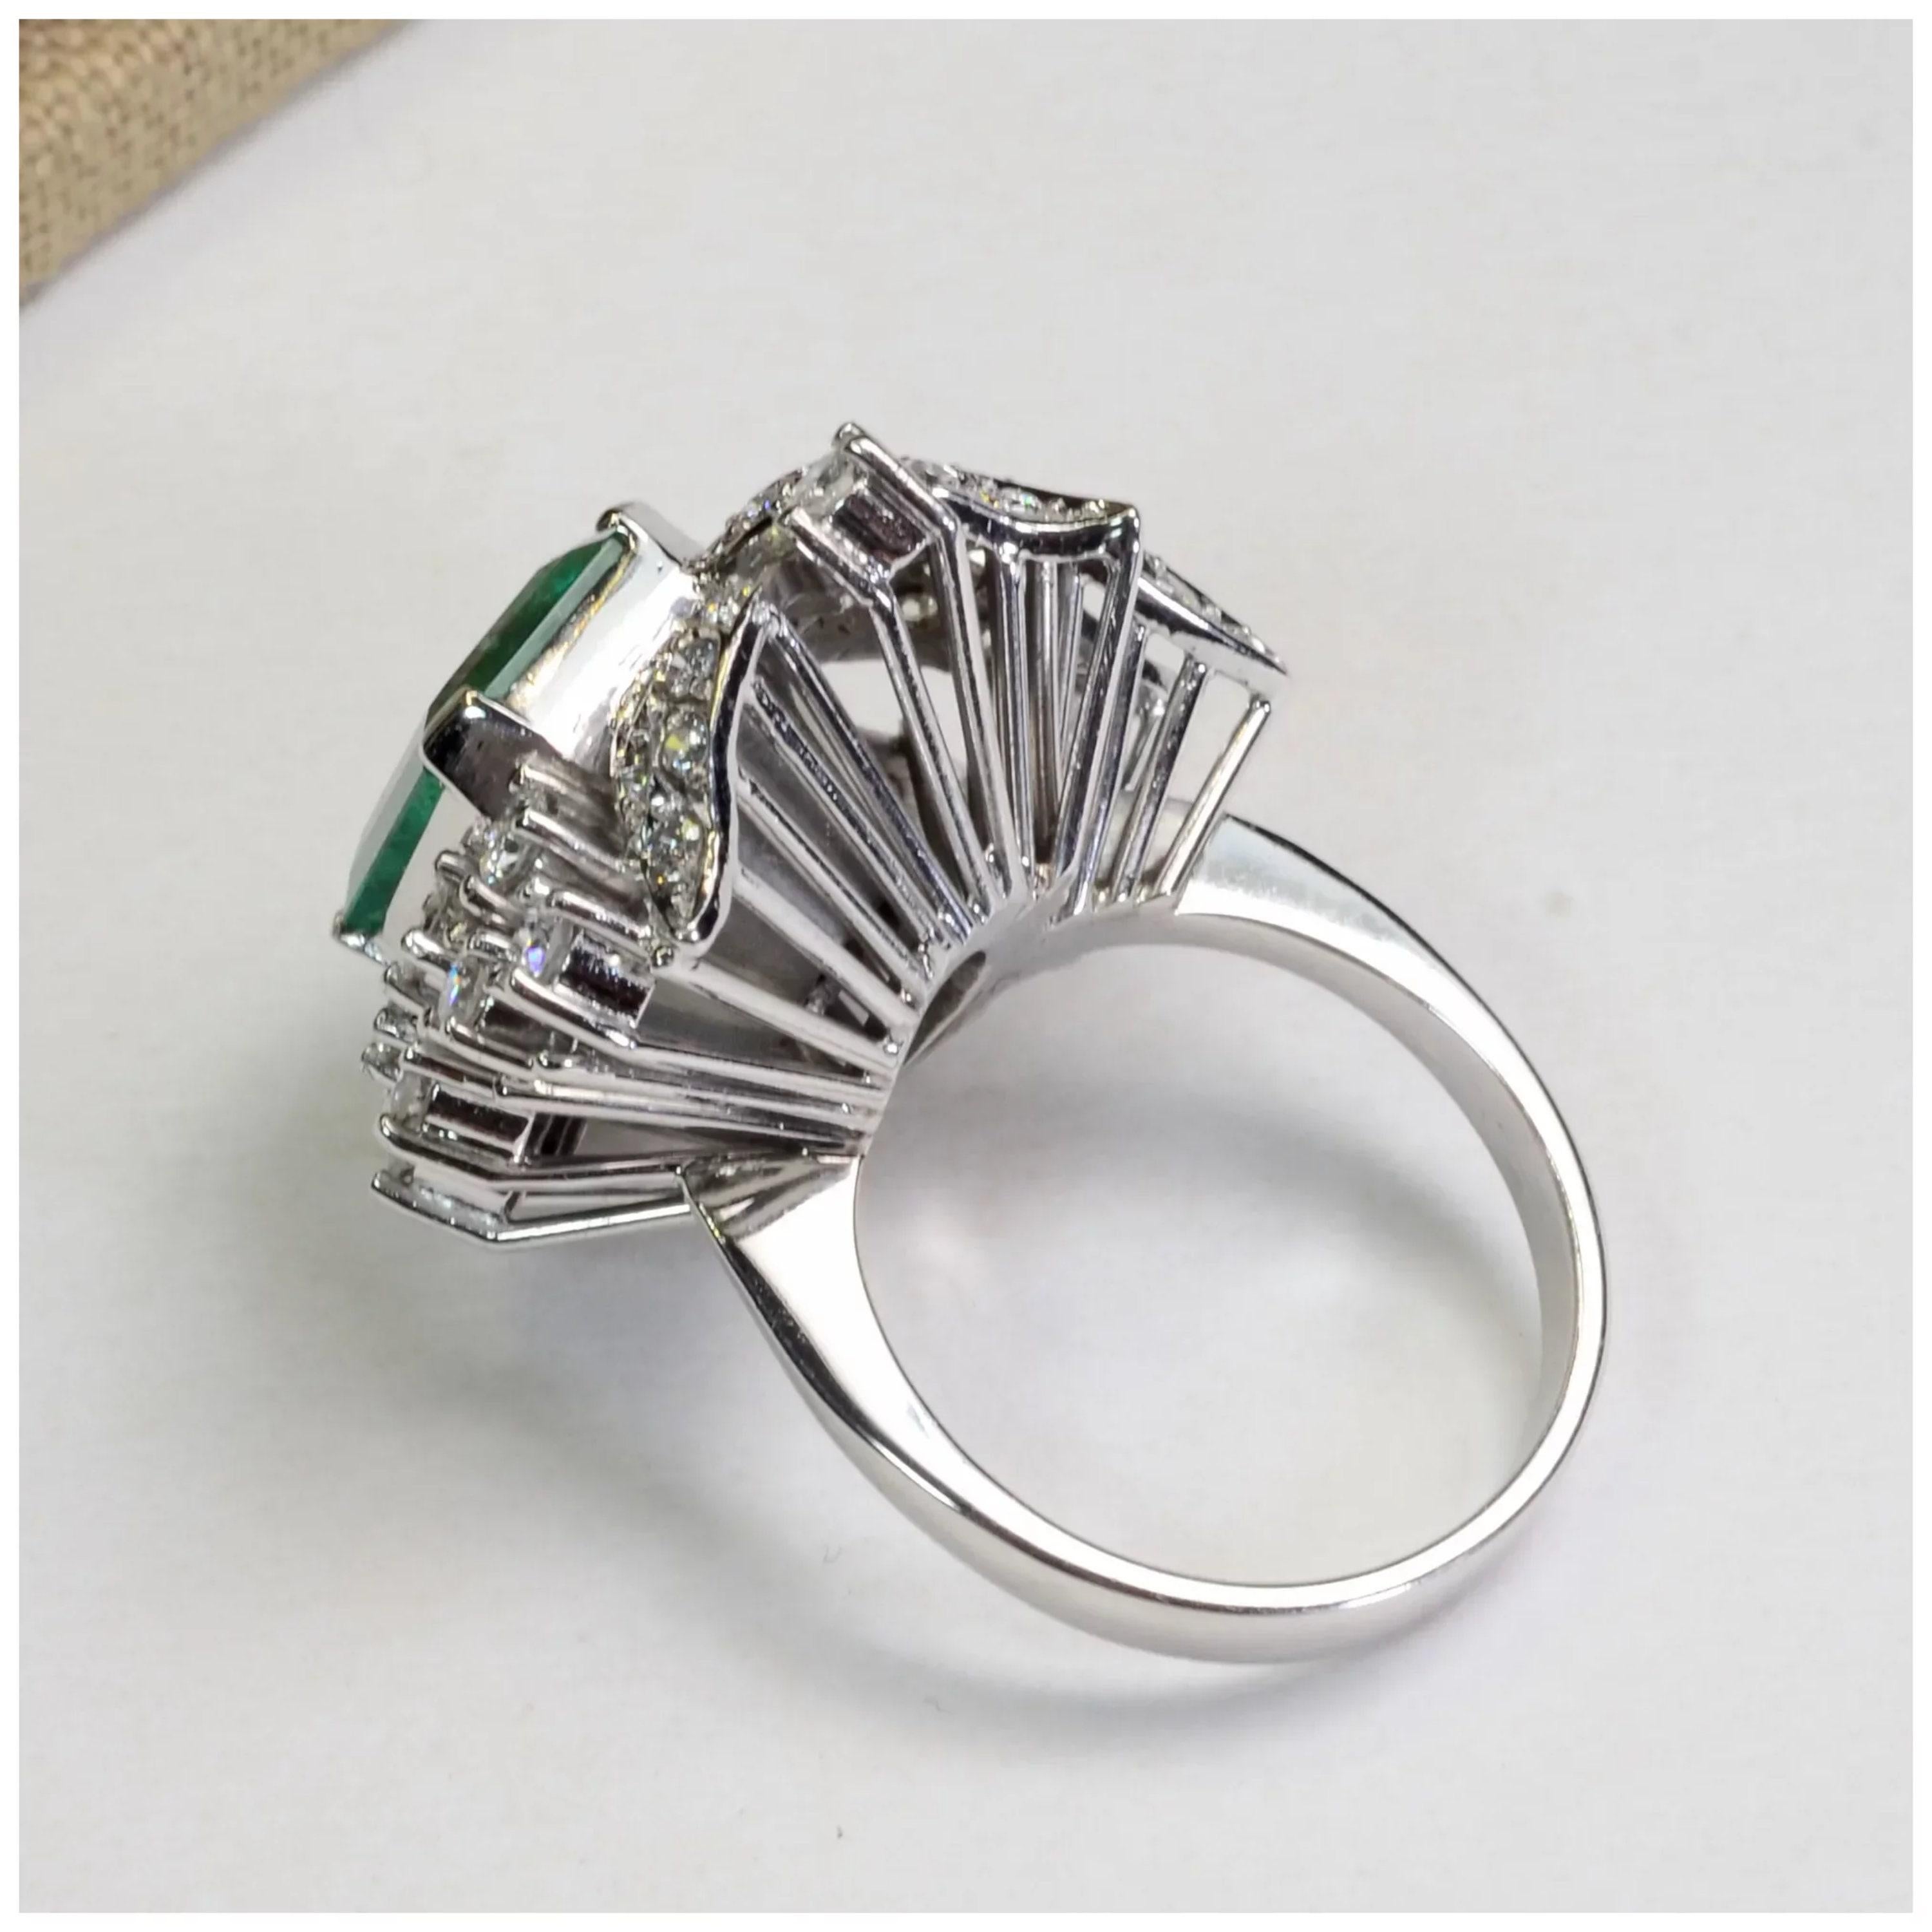 For Sale:  3 Carat Colombian Emerald Diamond Engagement Wedding Ring White Gold Cocktail  2